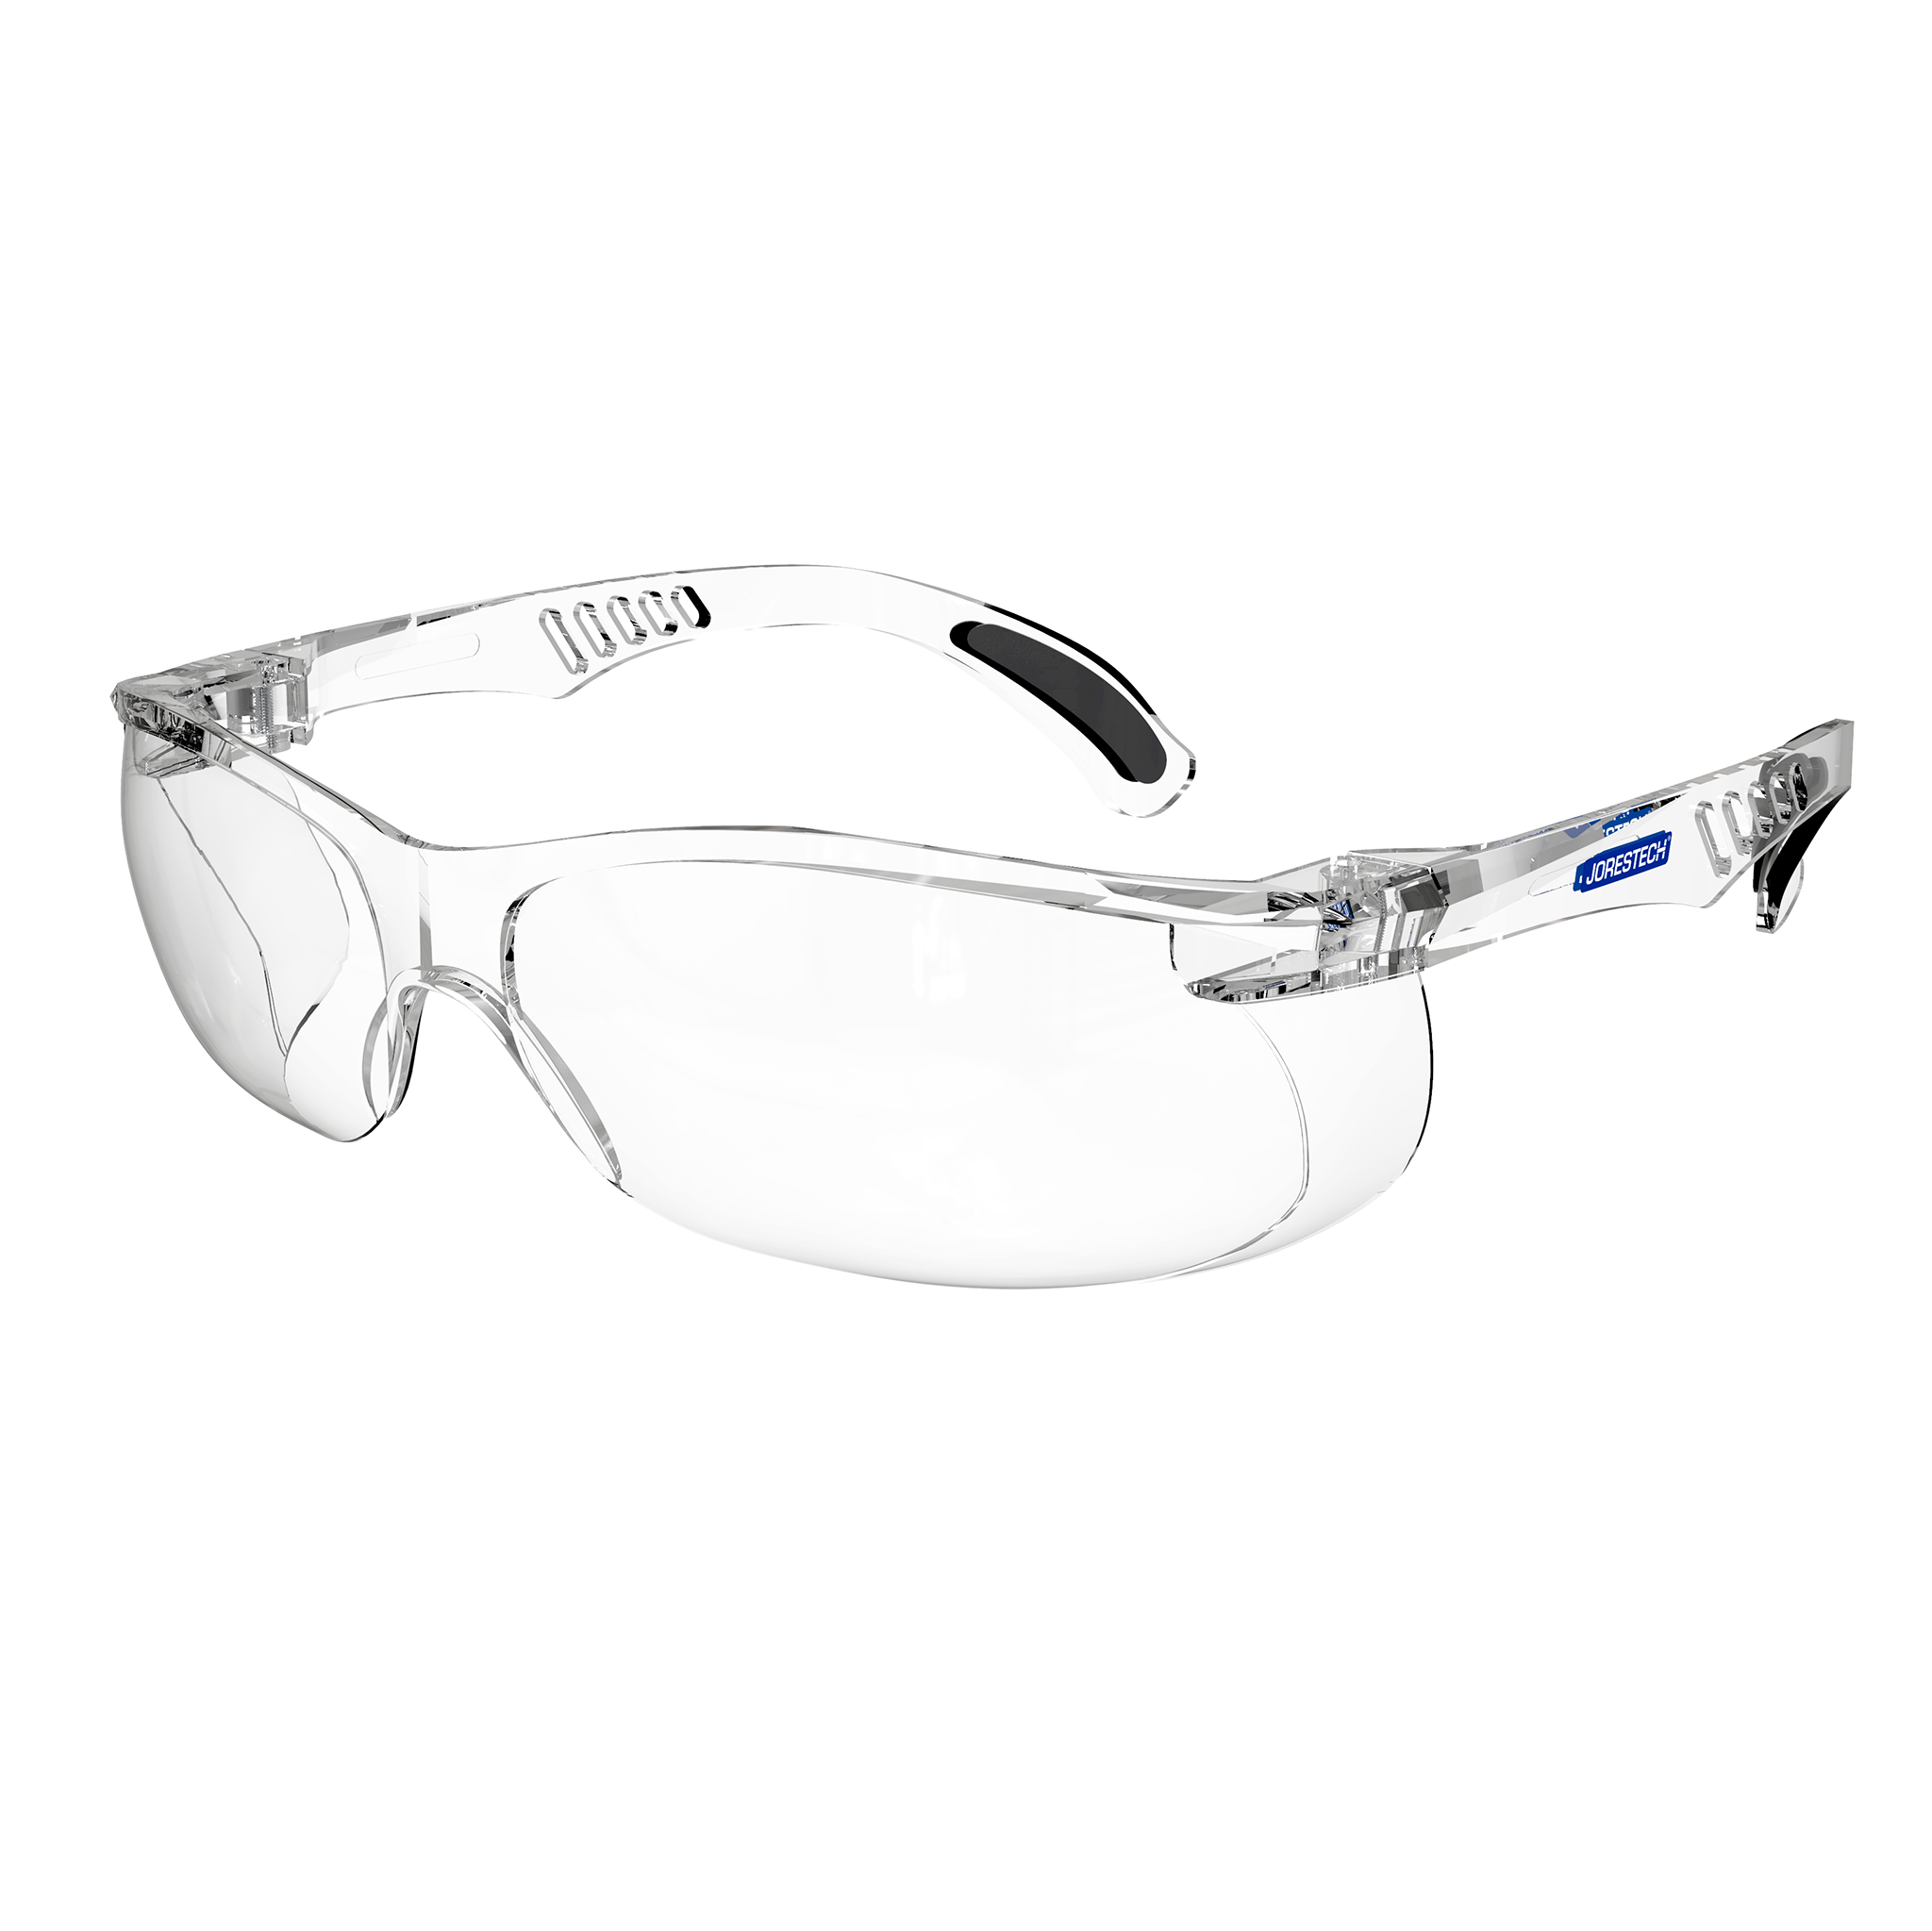 S-Curve Safety Goggles/Glasses Holders with Eight Compartments